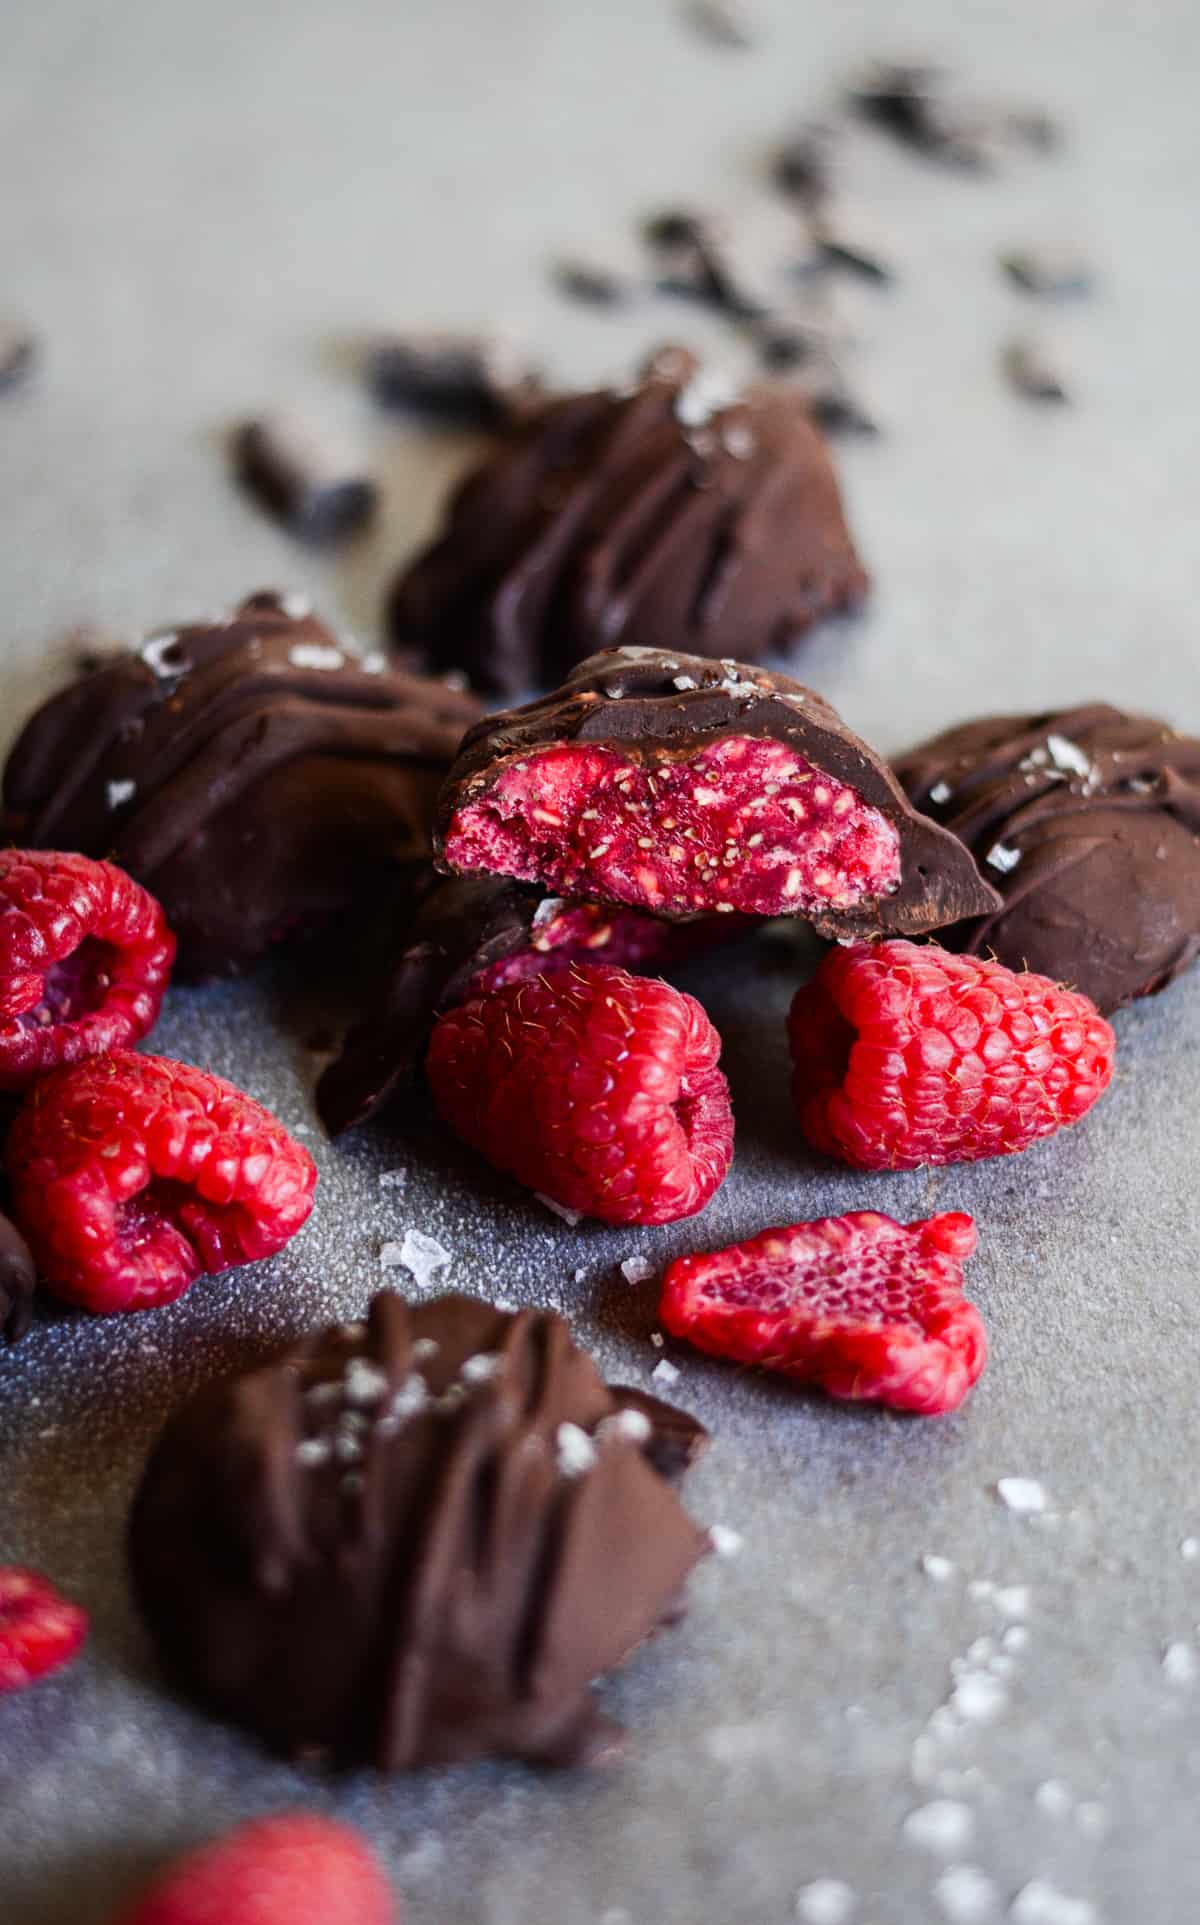 Raspberry chia jam covered in chocolate on a platter with raspberries.